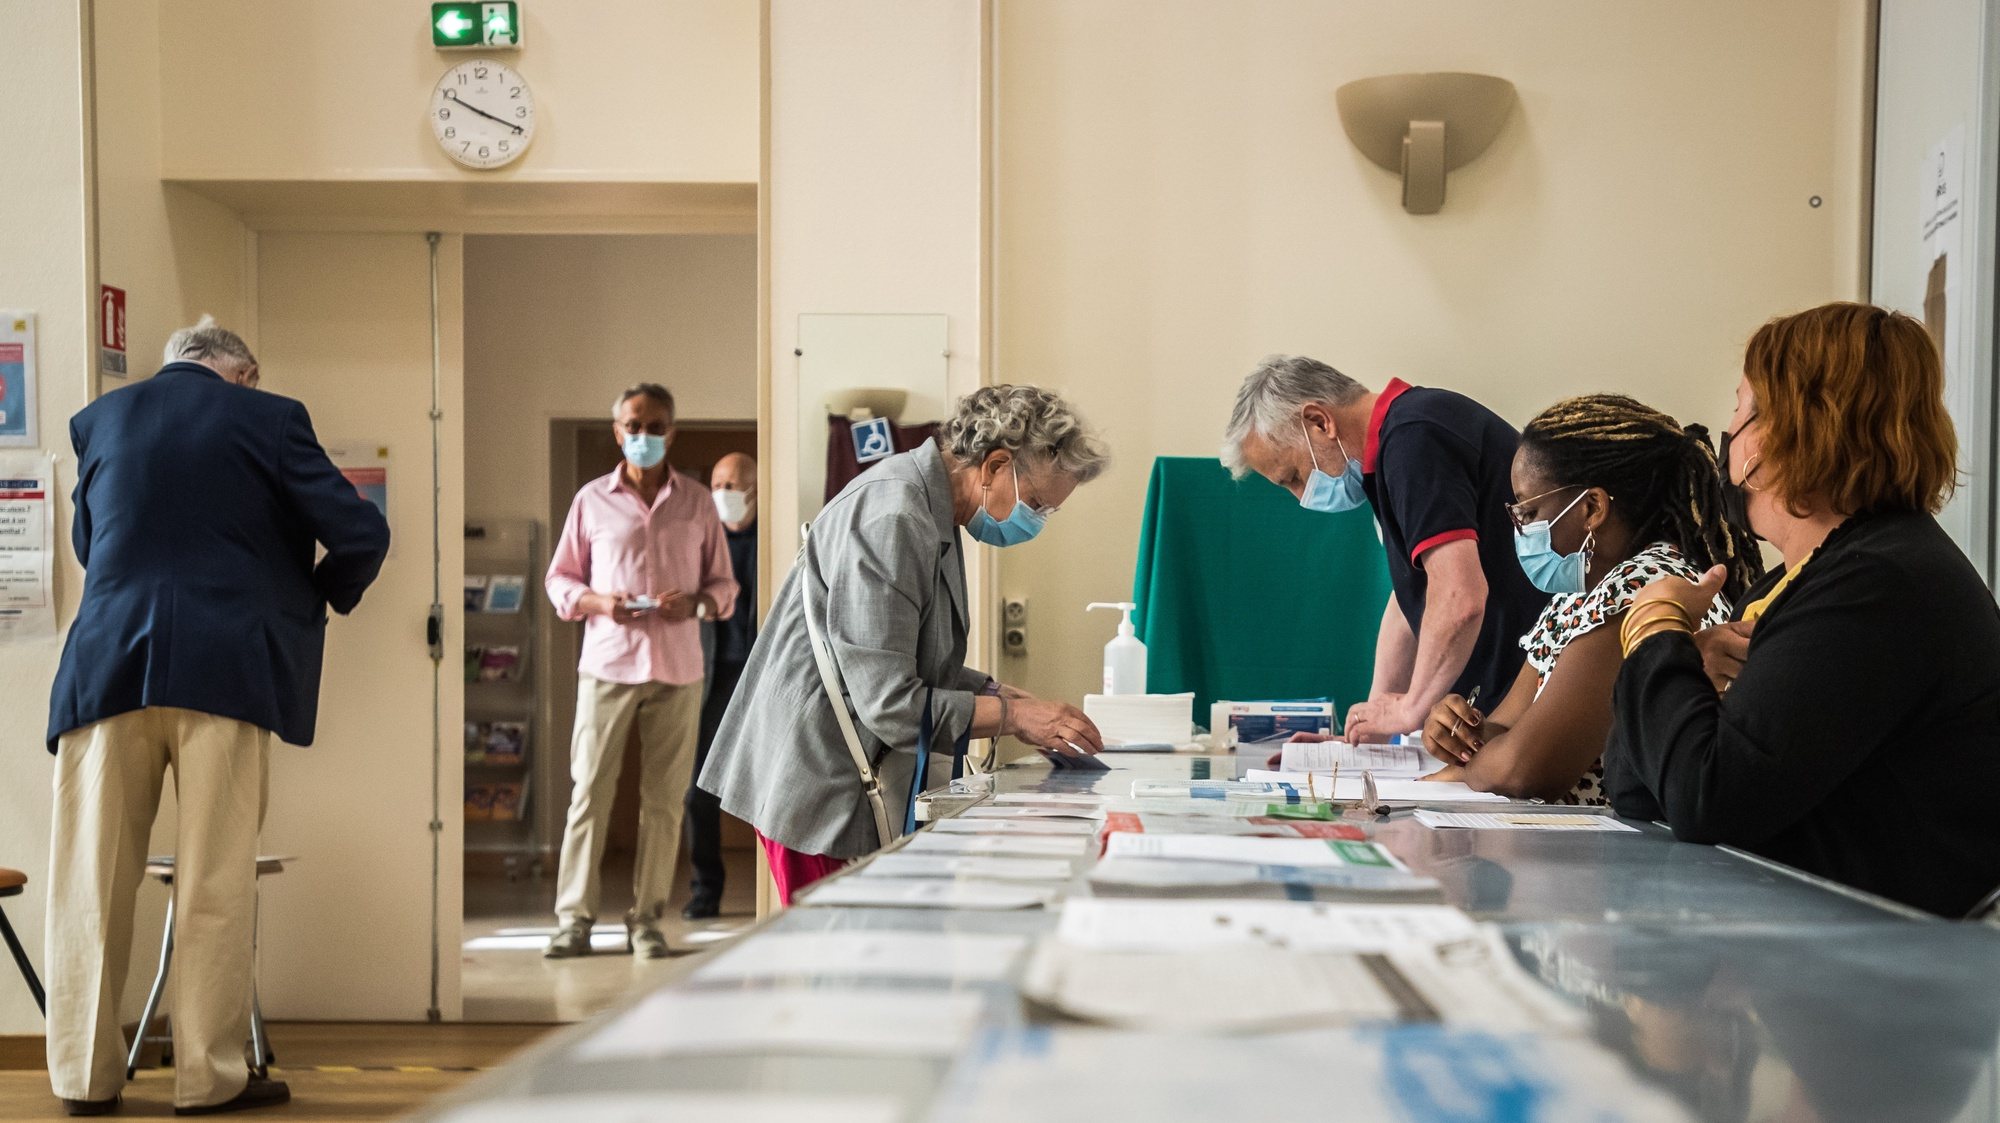 epa09287999 Parisians vote at a polling station during the first round of the 2021 Regional Elections in Paris, France, 20 June 2021. French Regional Elections will take place on 20 and 27 June 2021.  EPA/CHRISTOPHE PETIT TESSON